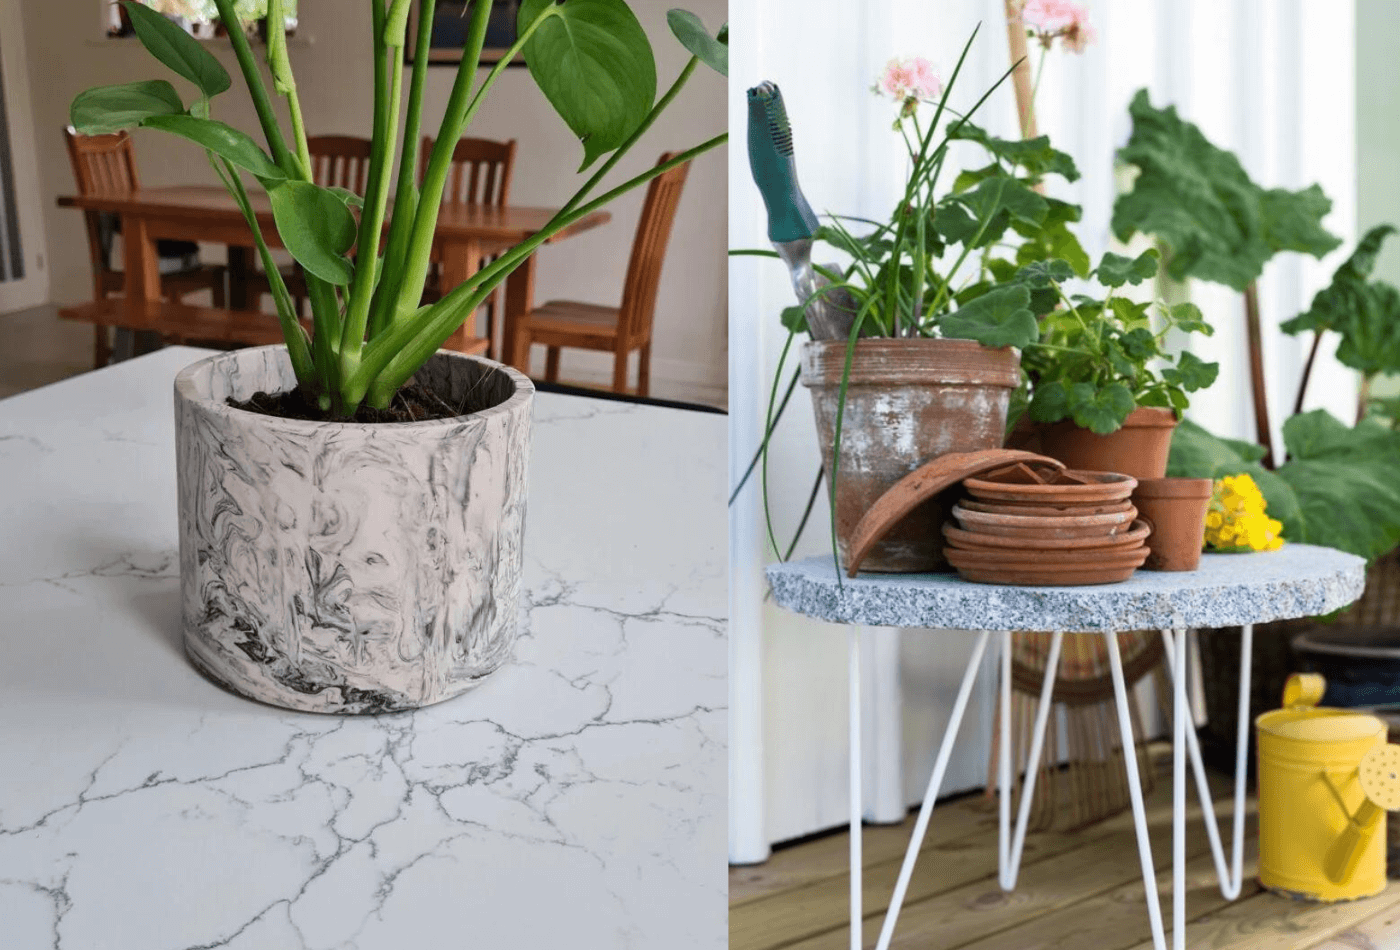 Work-tops for the Best Price Planters